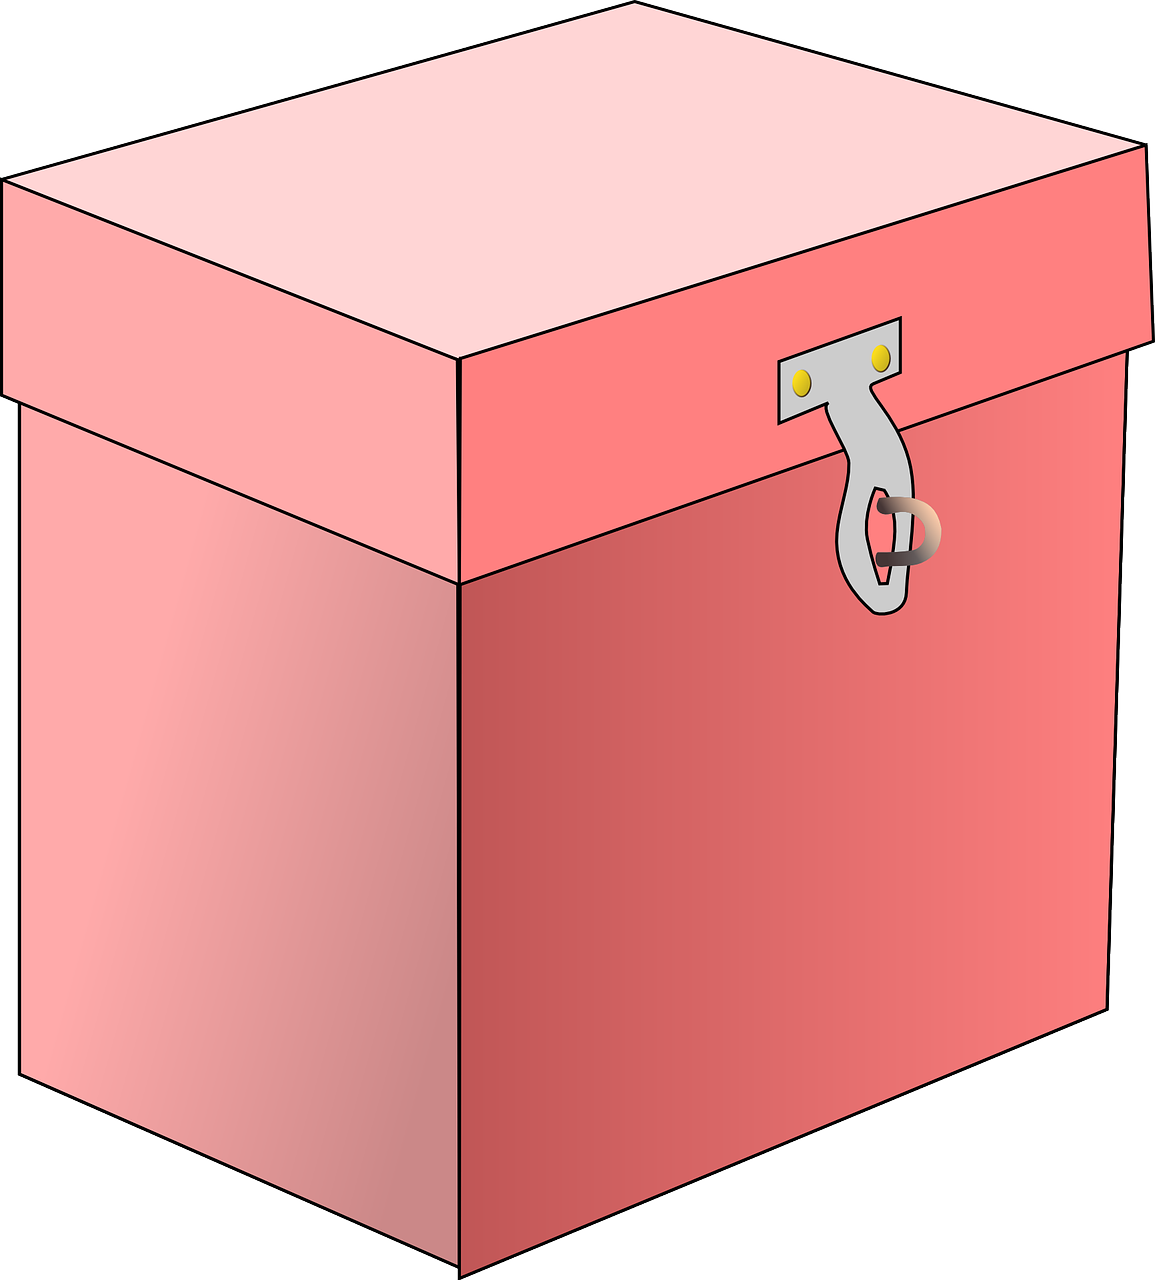 box,pink,closed,locked,storage,container,package,metal,free vector graphics,free pictures, free photos, free images, royalty free, free illustrations, public domain